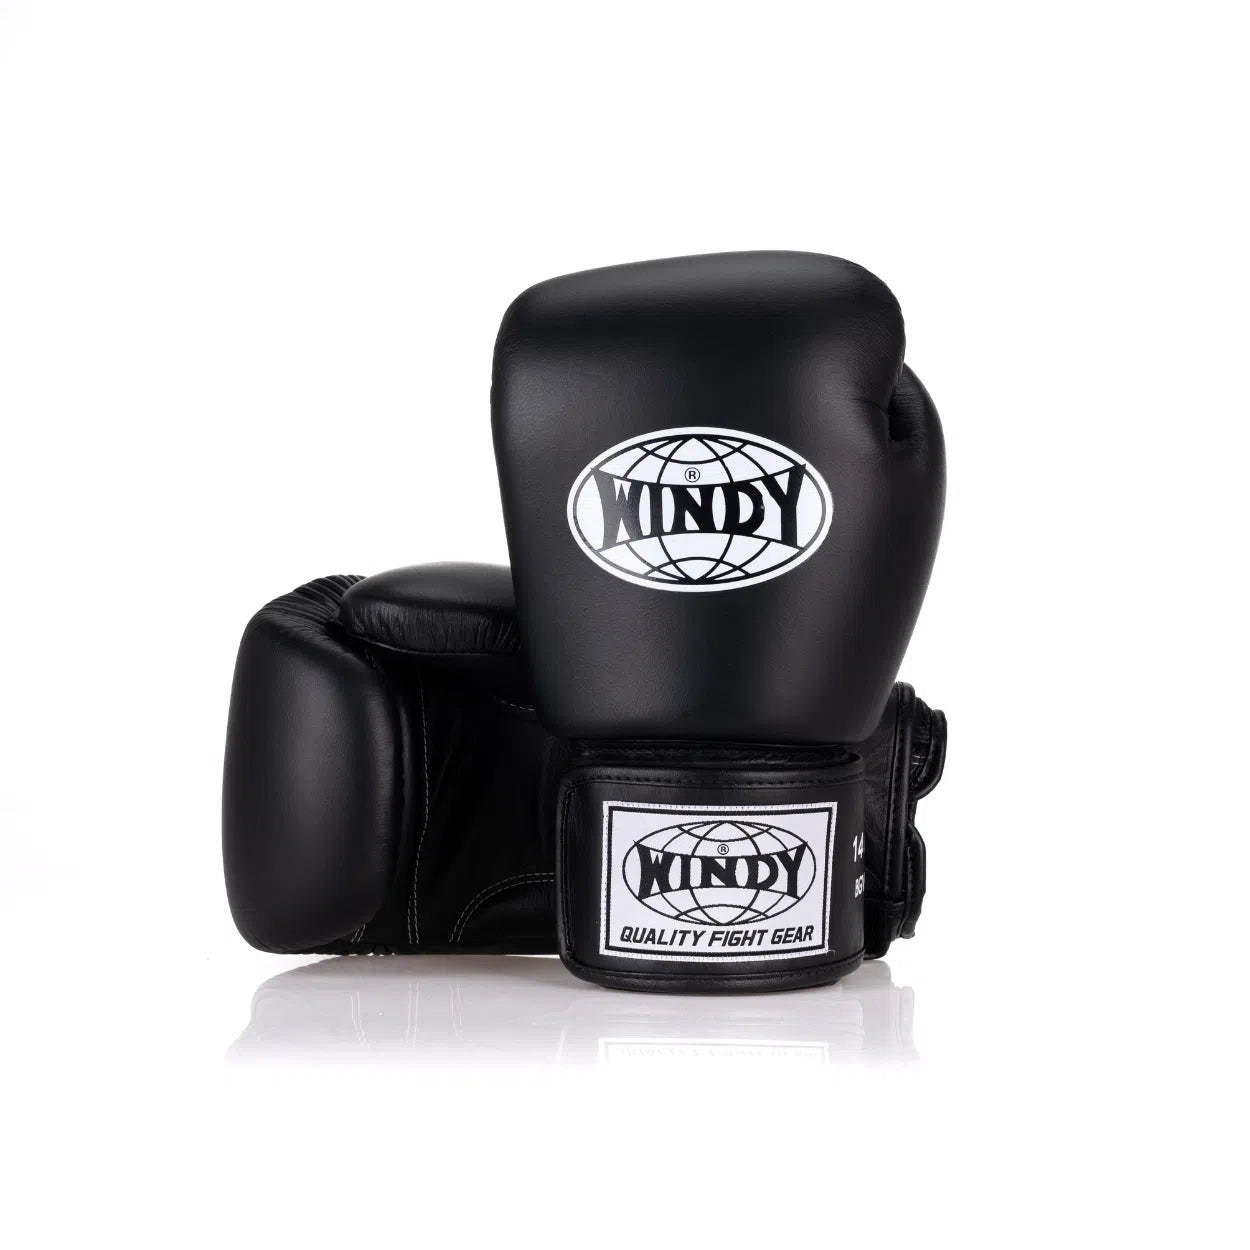 Classic Leather Boxing Glove - Black